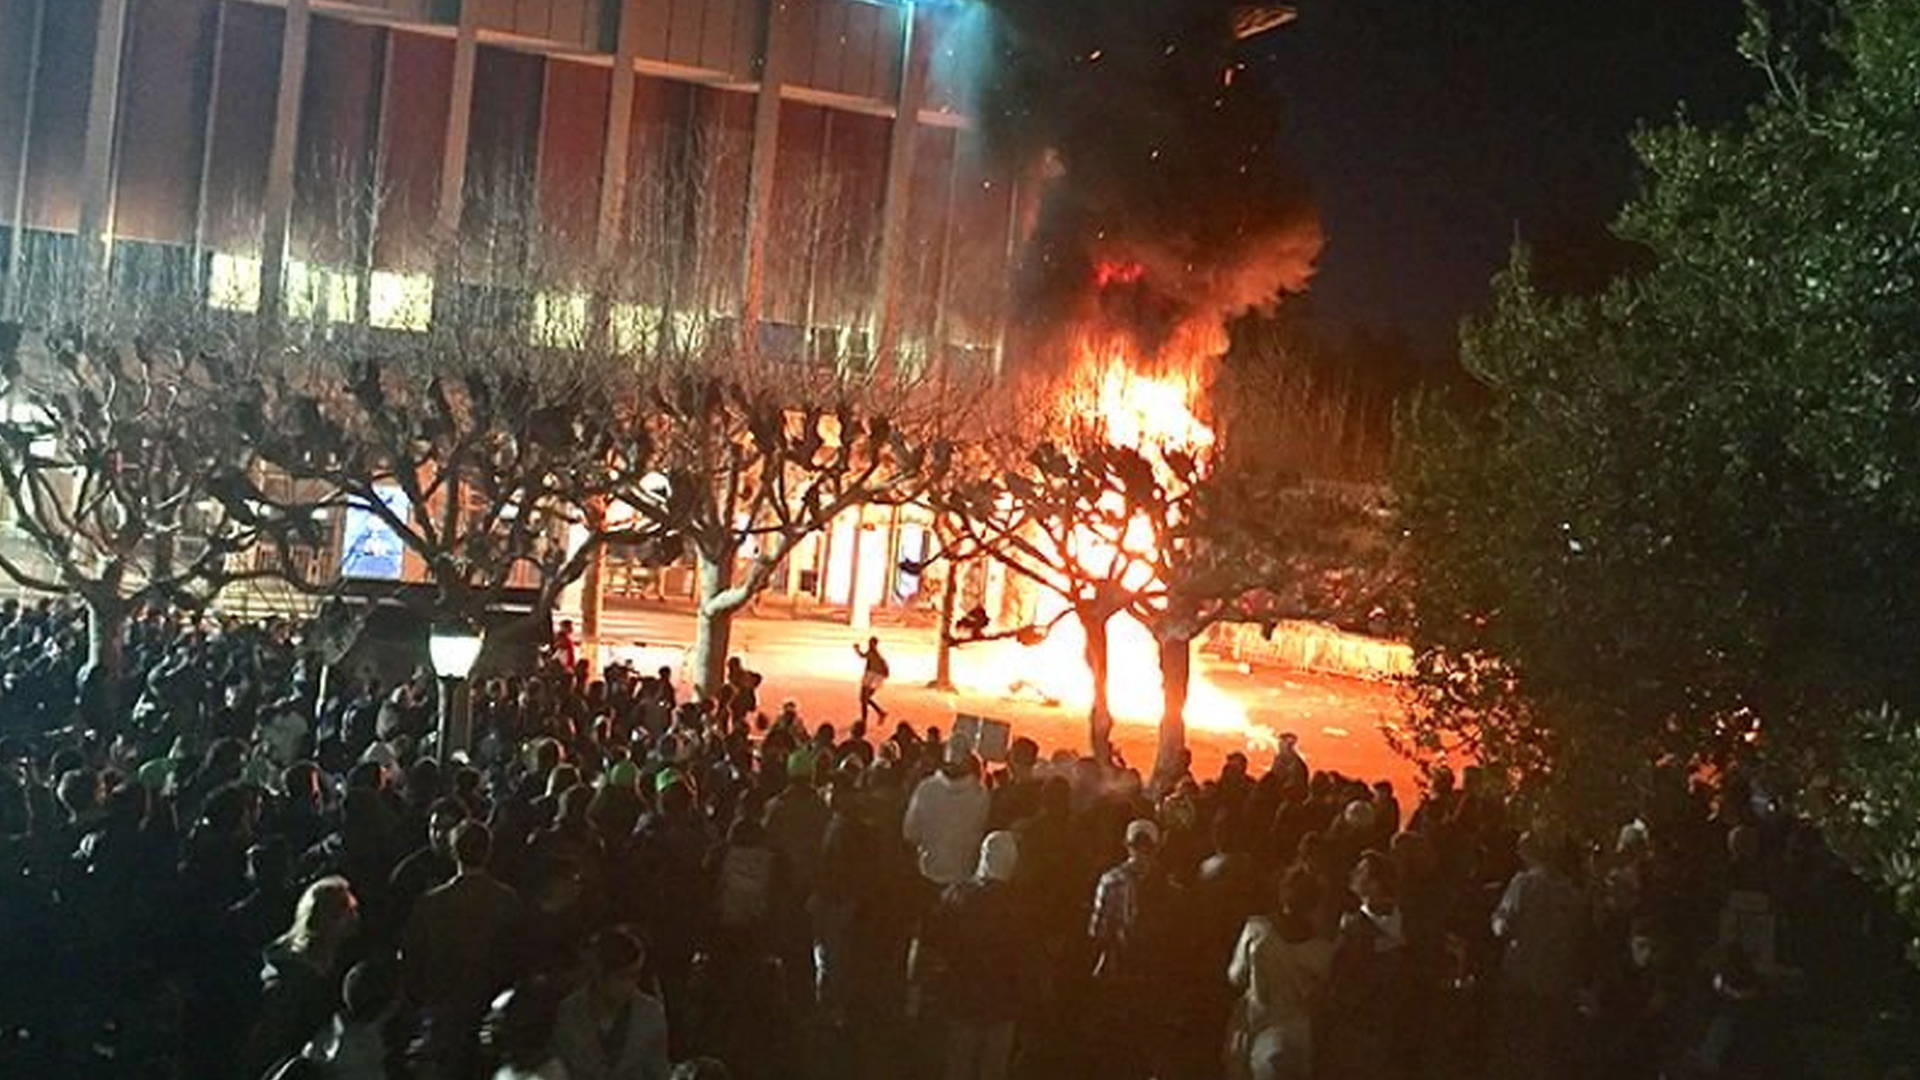 Protests Force Uc Berkeley To Cancel Speech By White Nationalist Milo Yiannopoulos Democracy Now 1920x1080